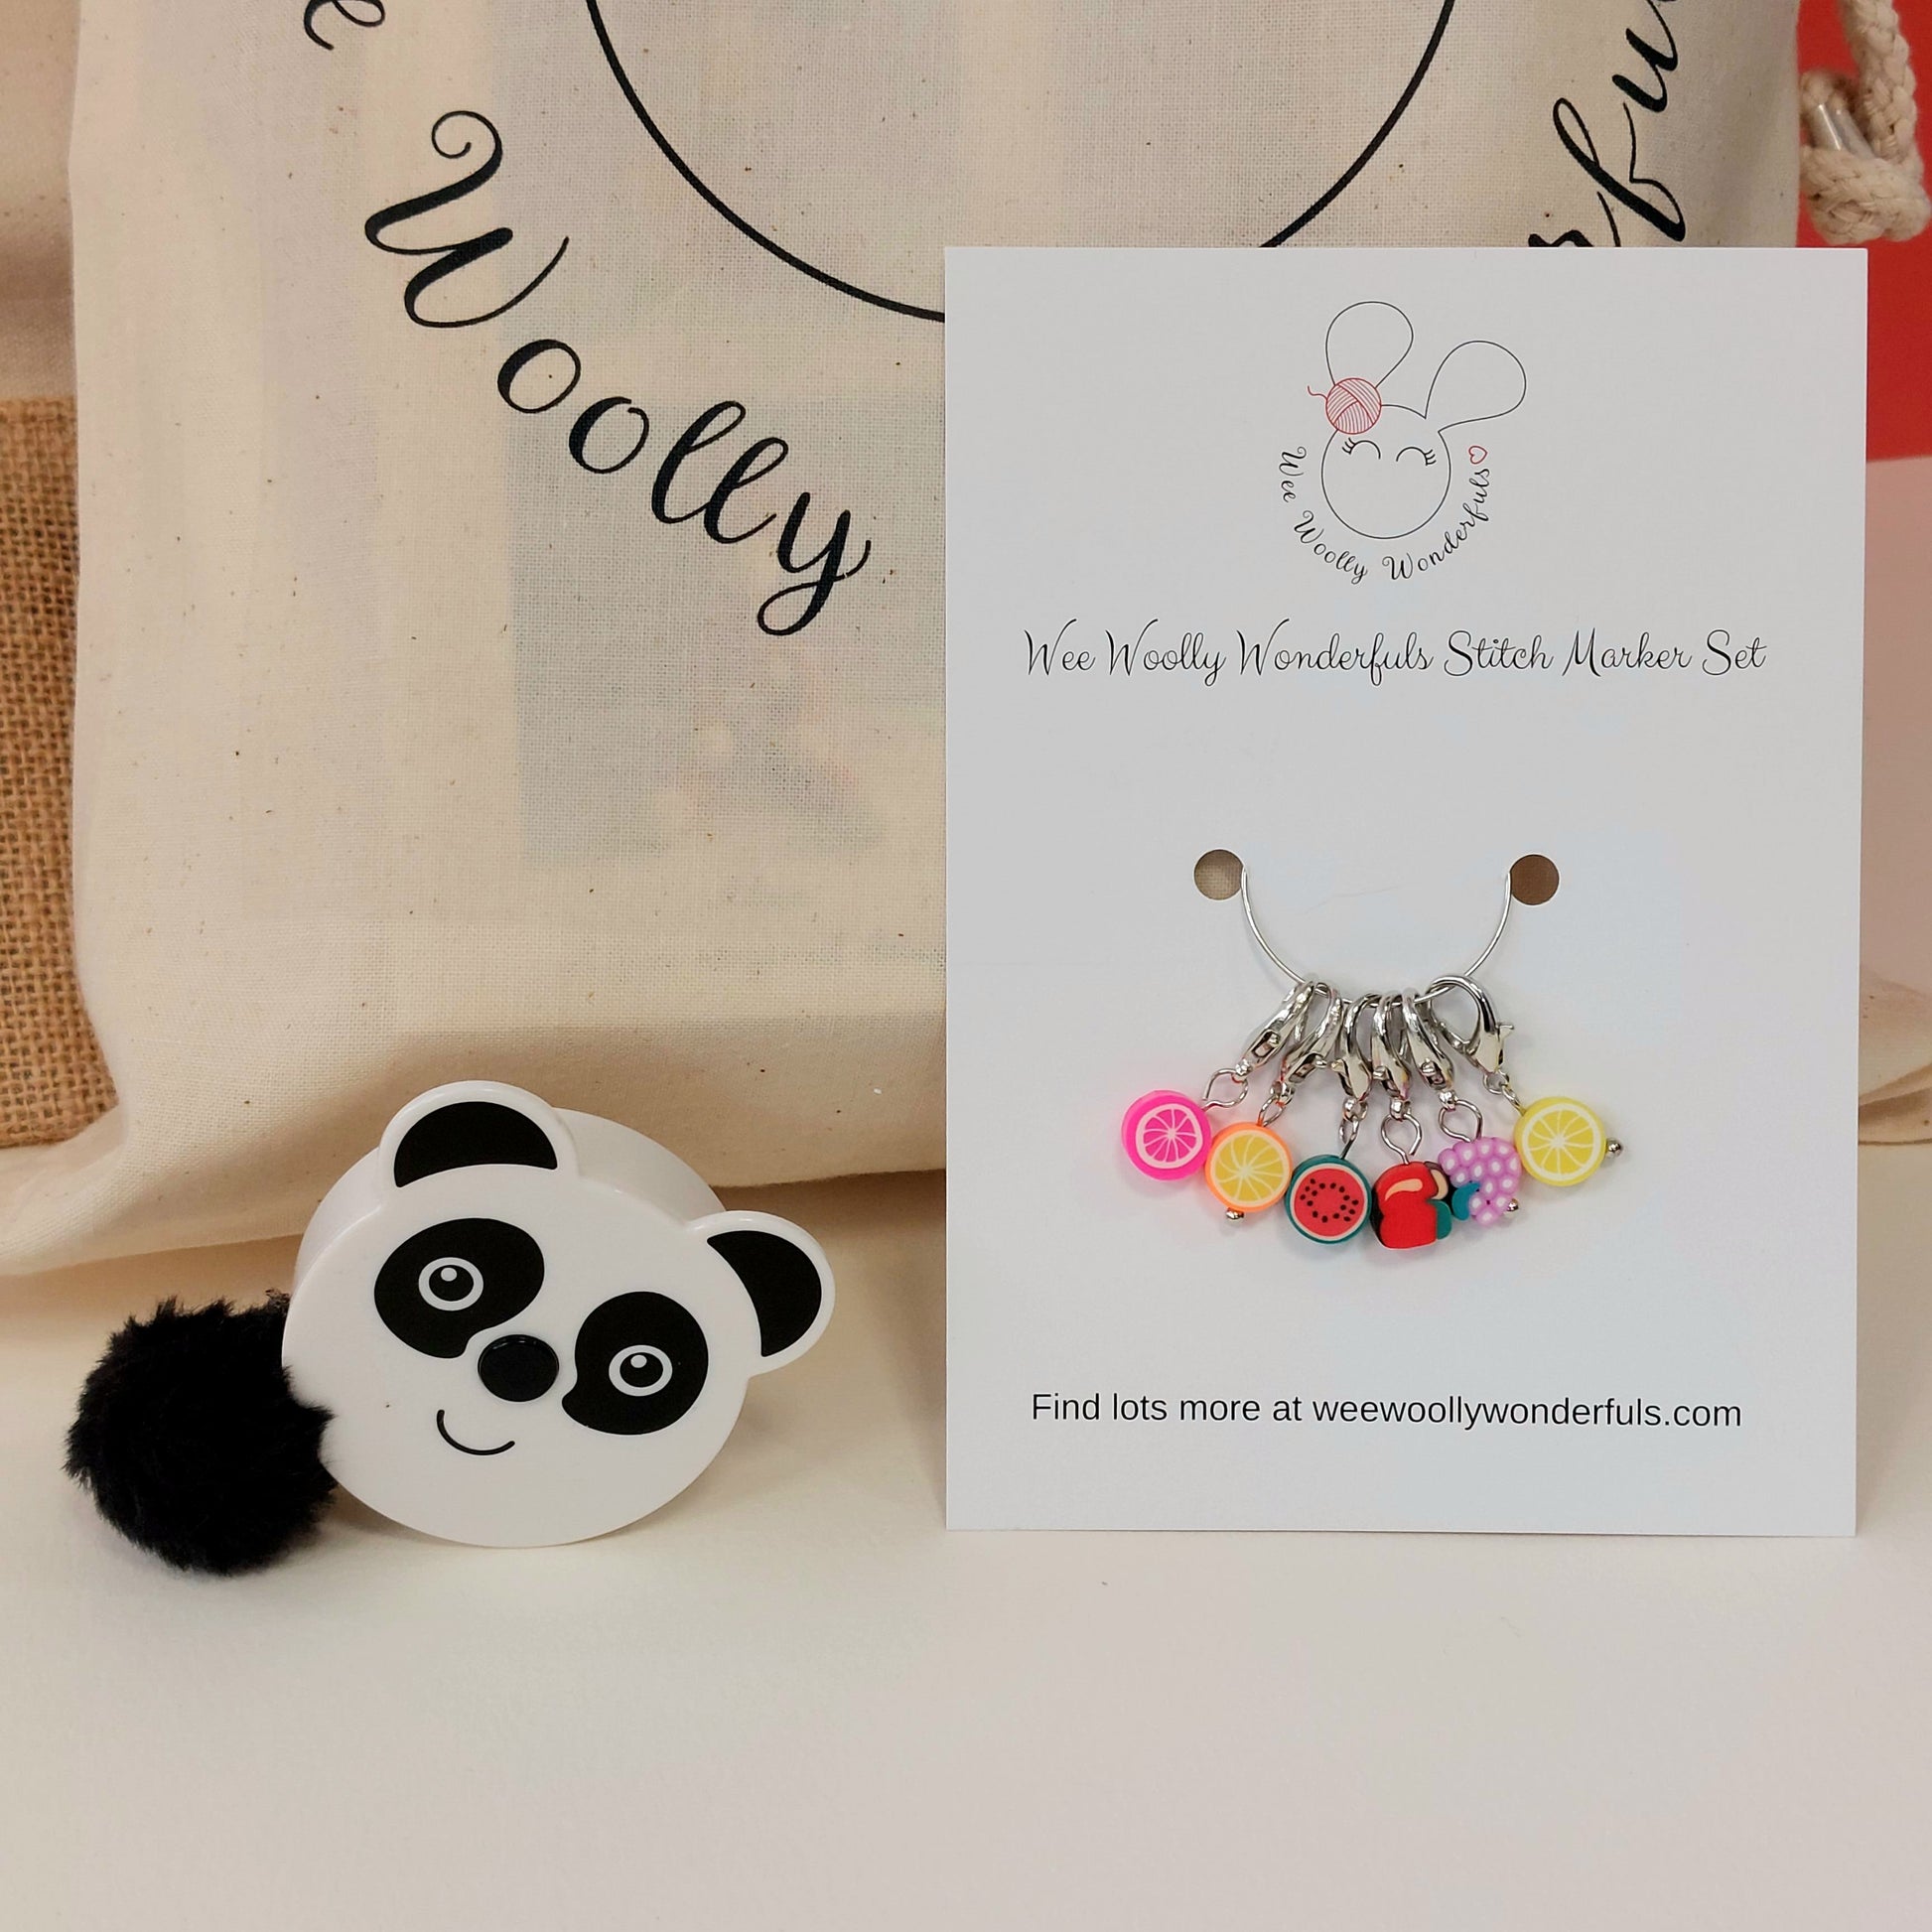 Stitch markers and animal tape